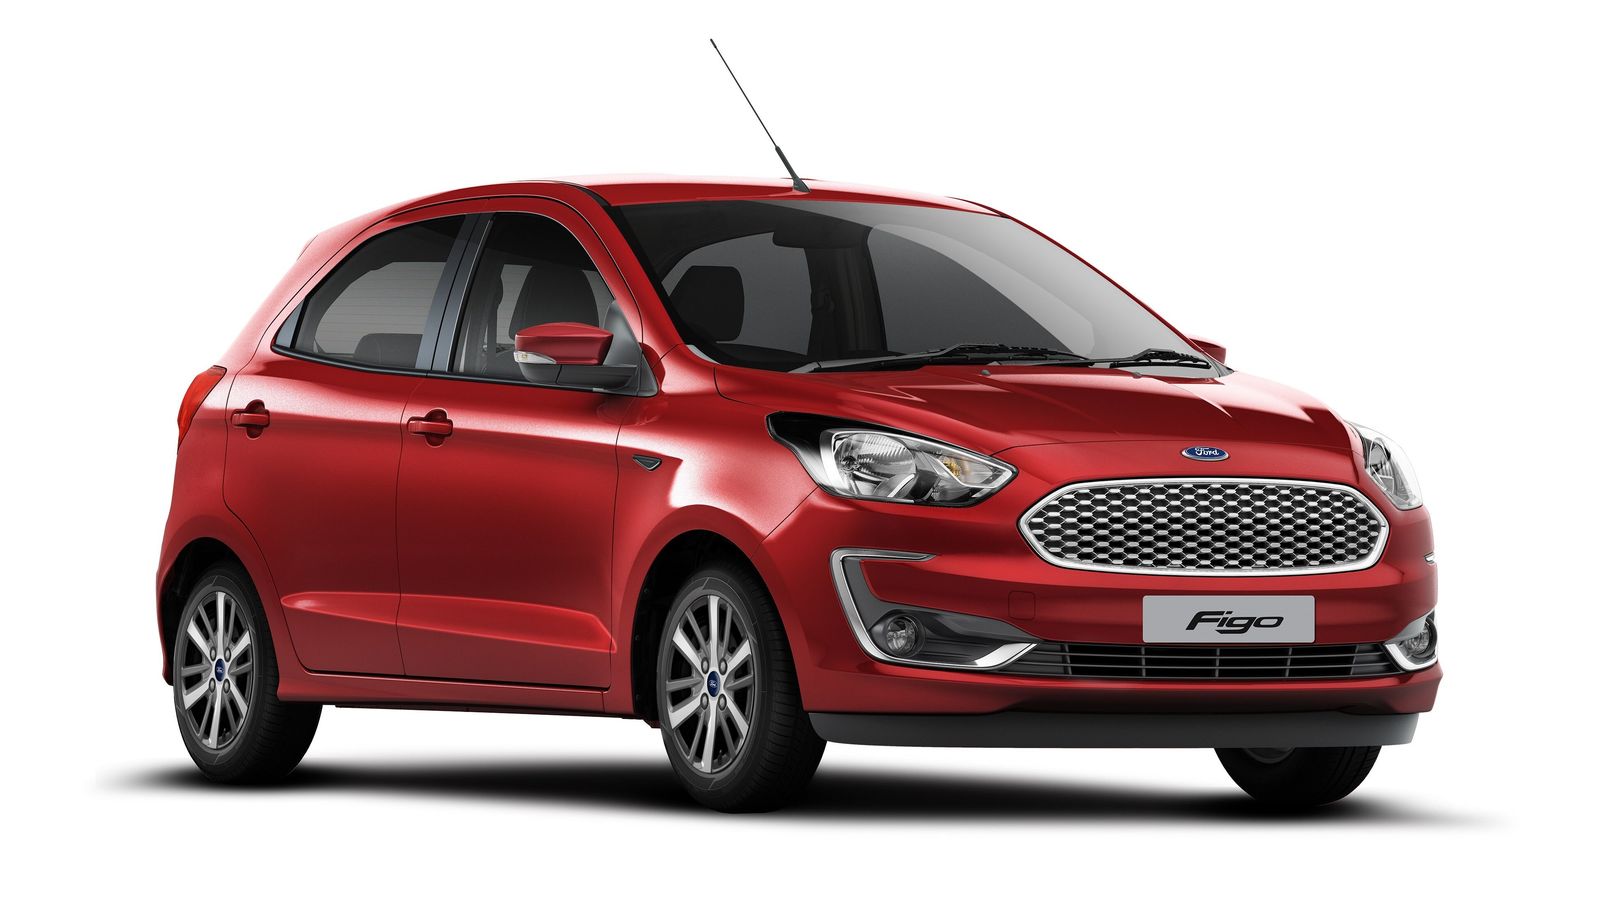 Ford Figo Automated launched at ₹7.75 lakh, will get Sports activities mode with new gearbox